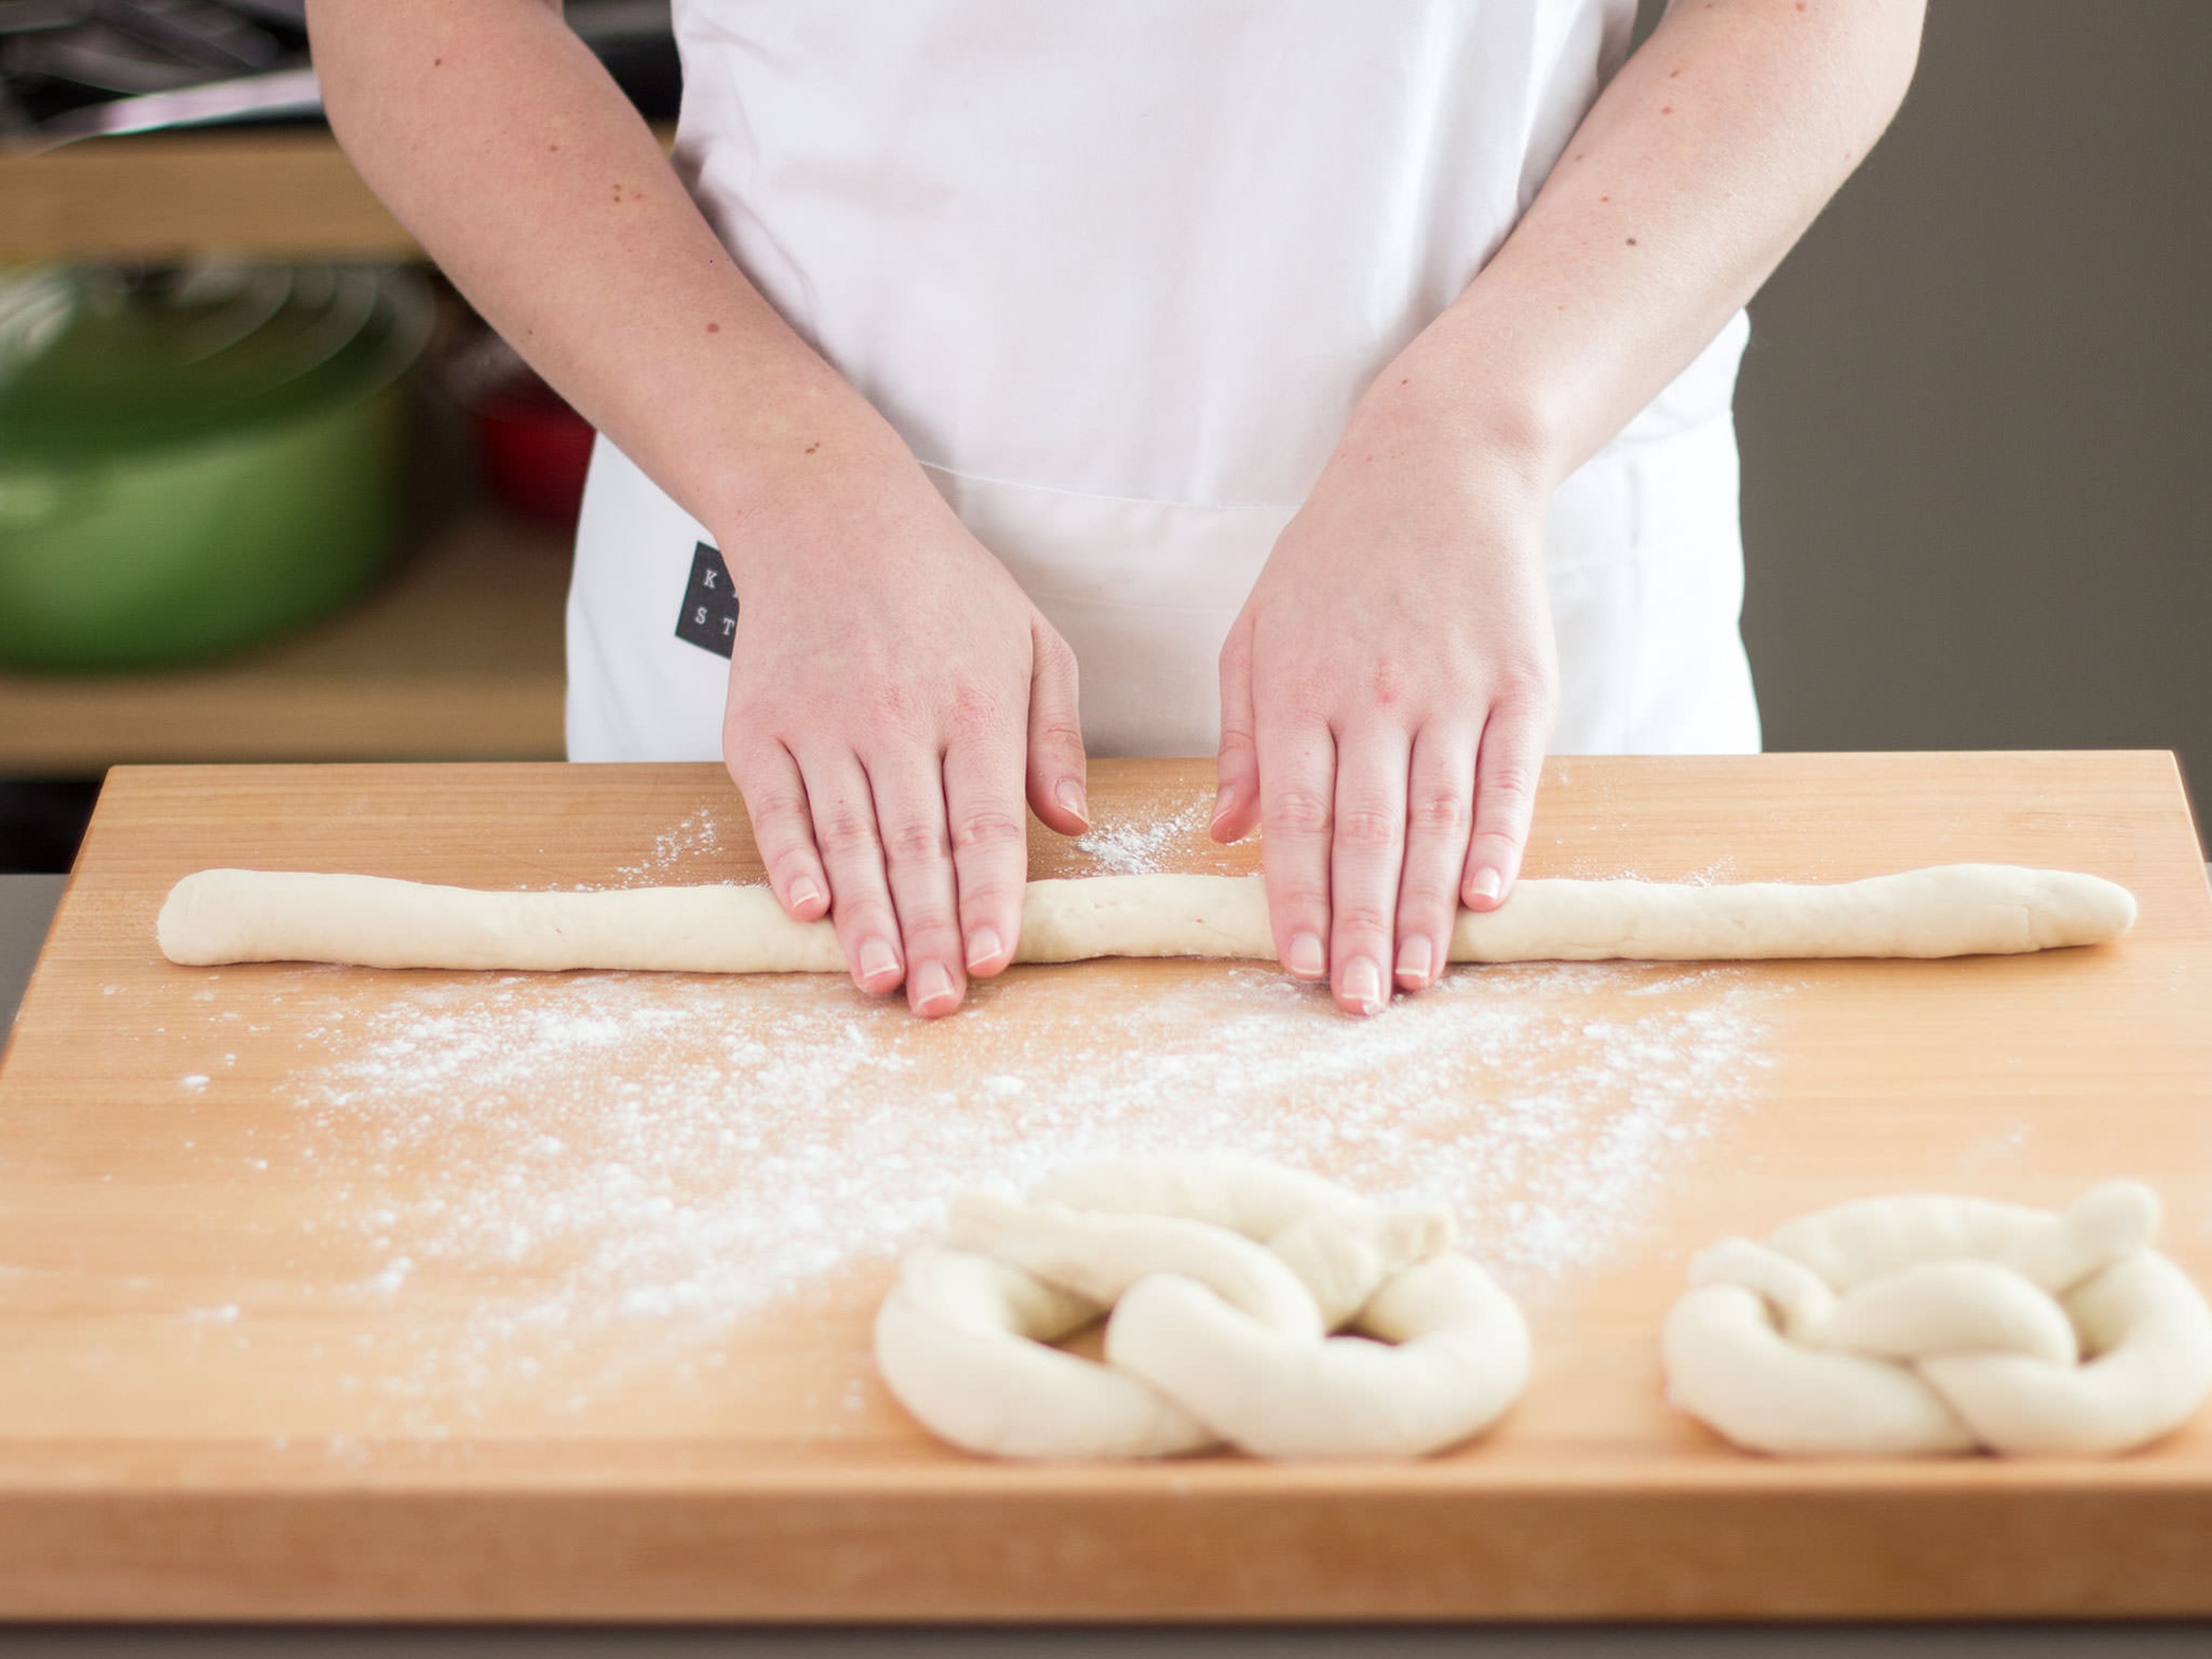 Preheat oven to 200°C/400°F. On a lightly floured surface, knead the dough once more and divide into ten portions. Roll each into long strips and fold into a pretzel shape.